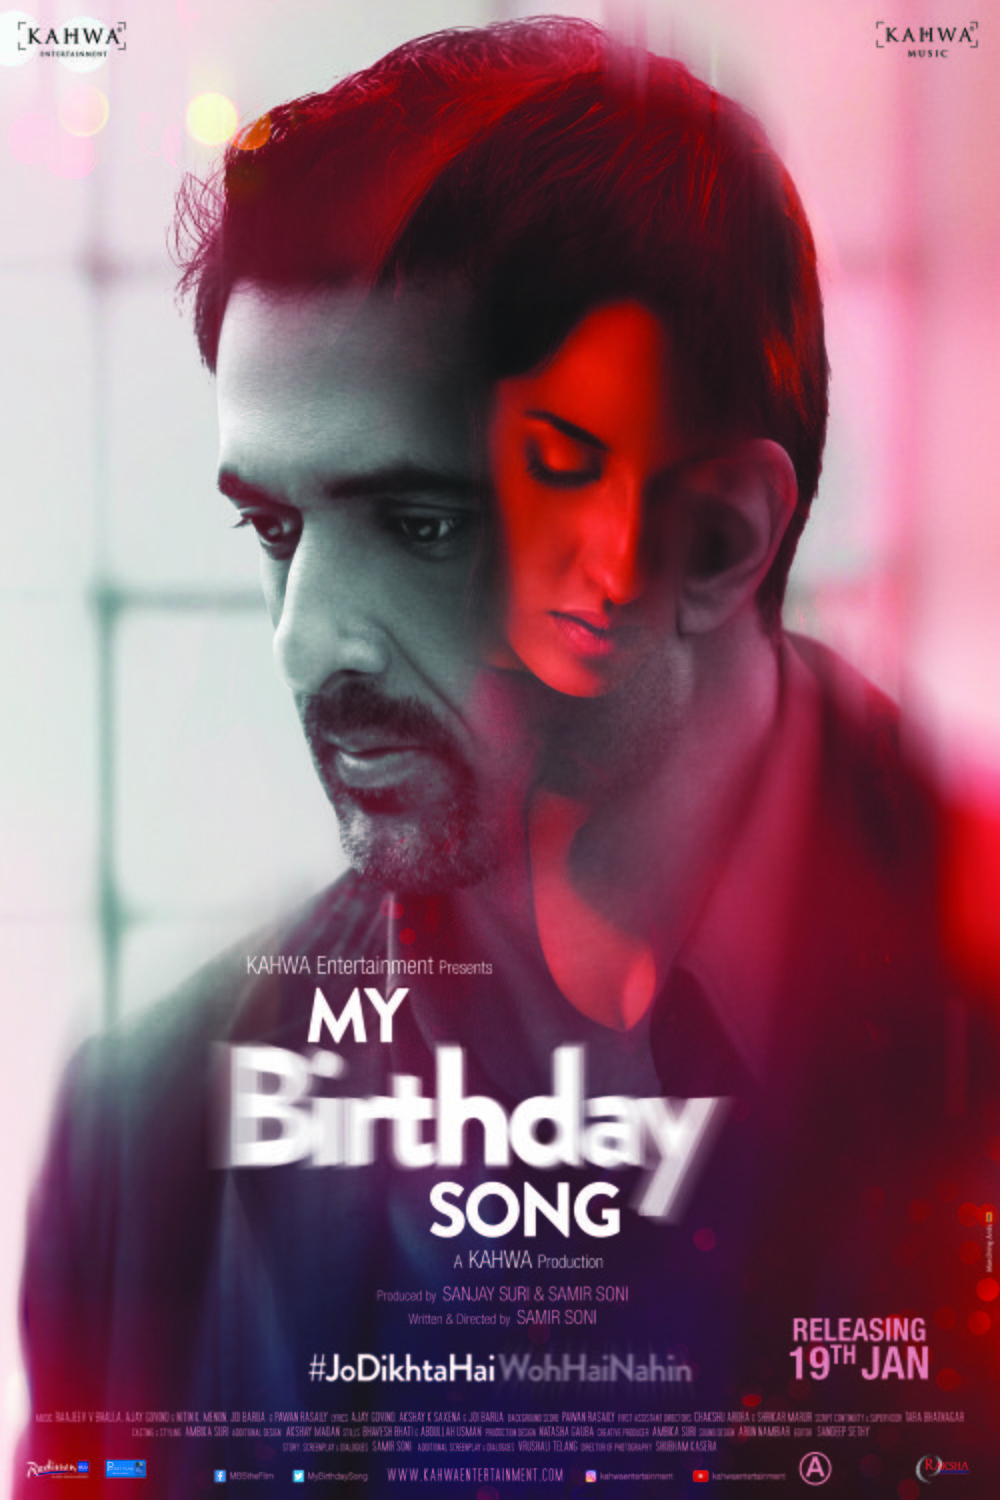 Hindi poster of the movie My Birthday Song